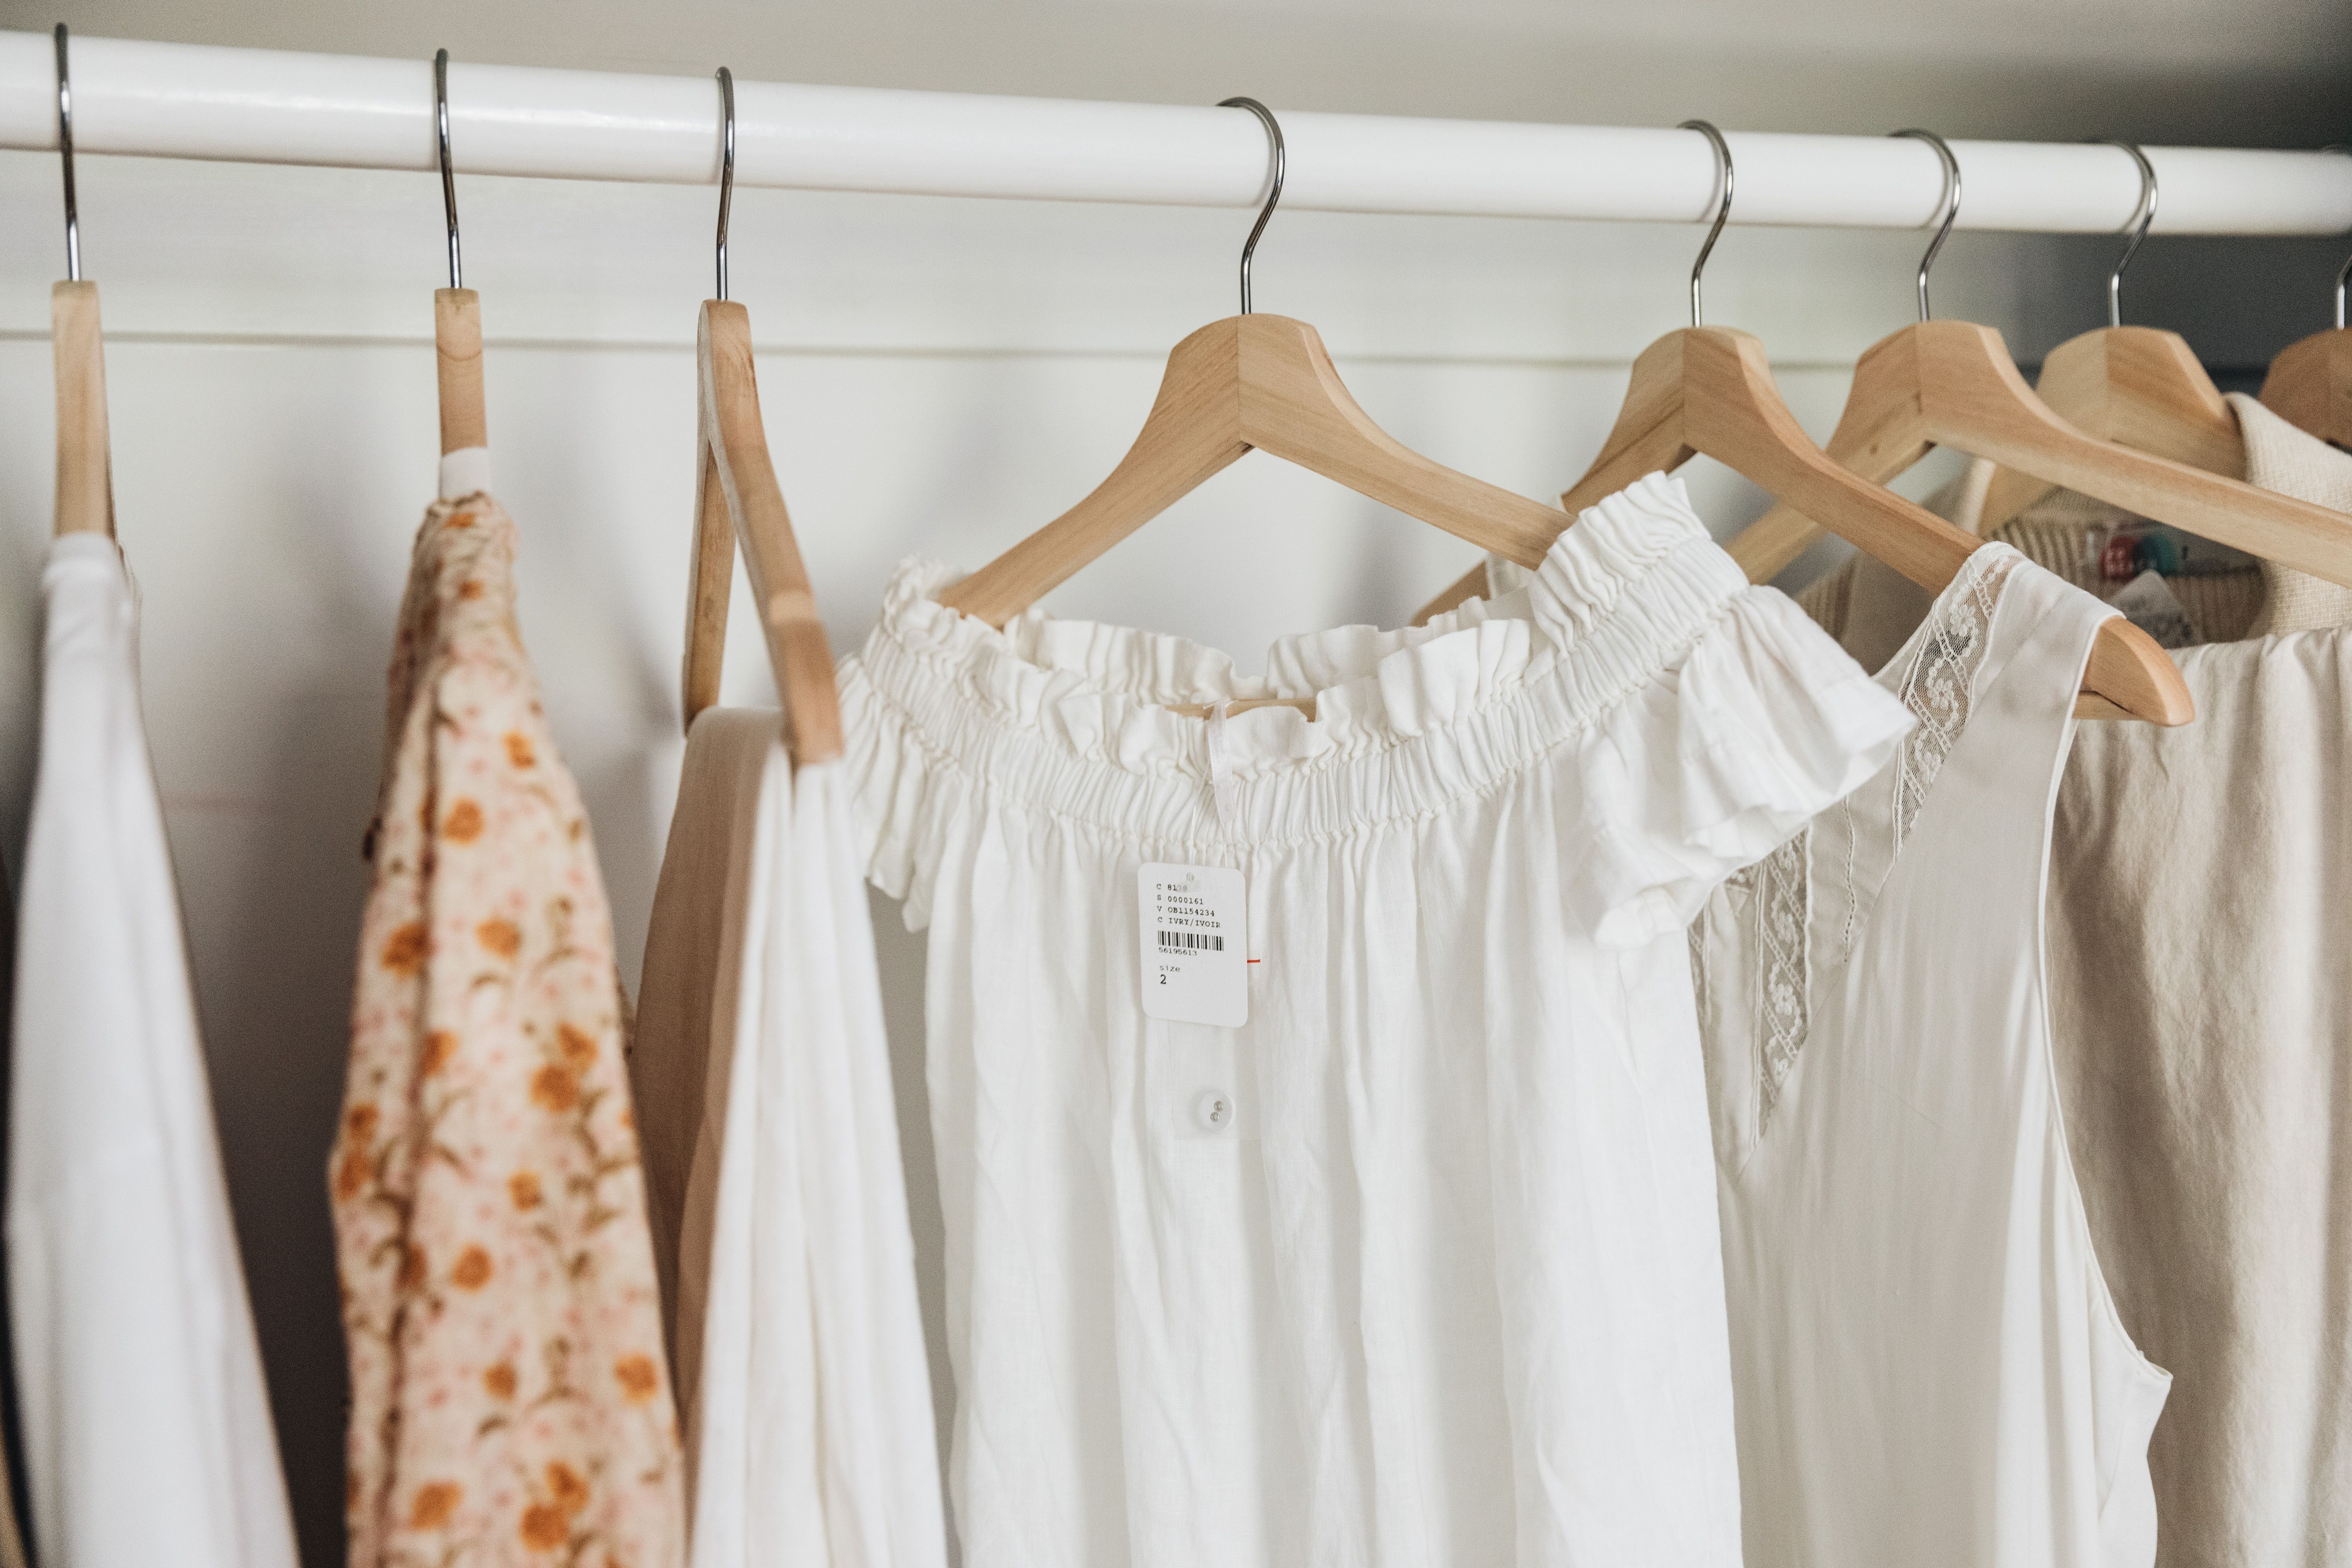 Do You Need to Wash New Clothes Before Wearing Them?